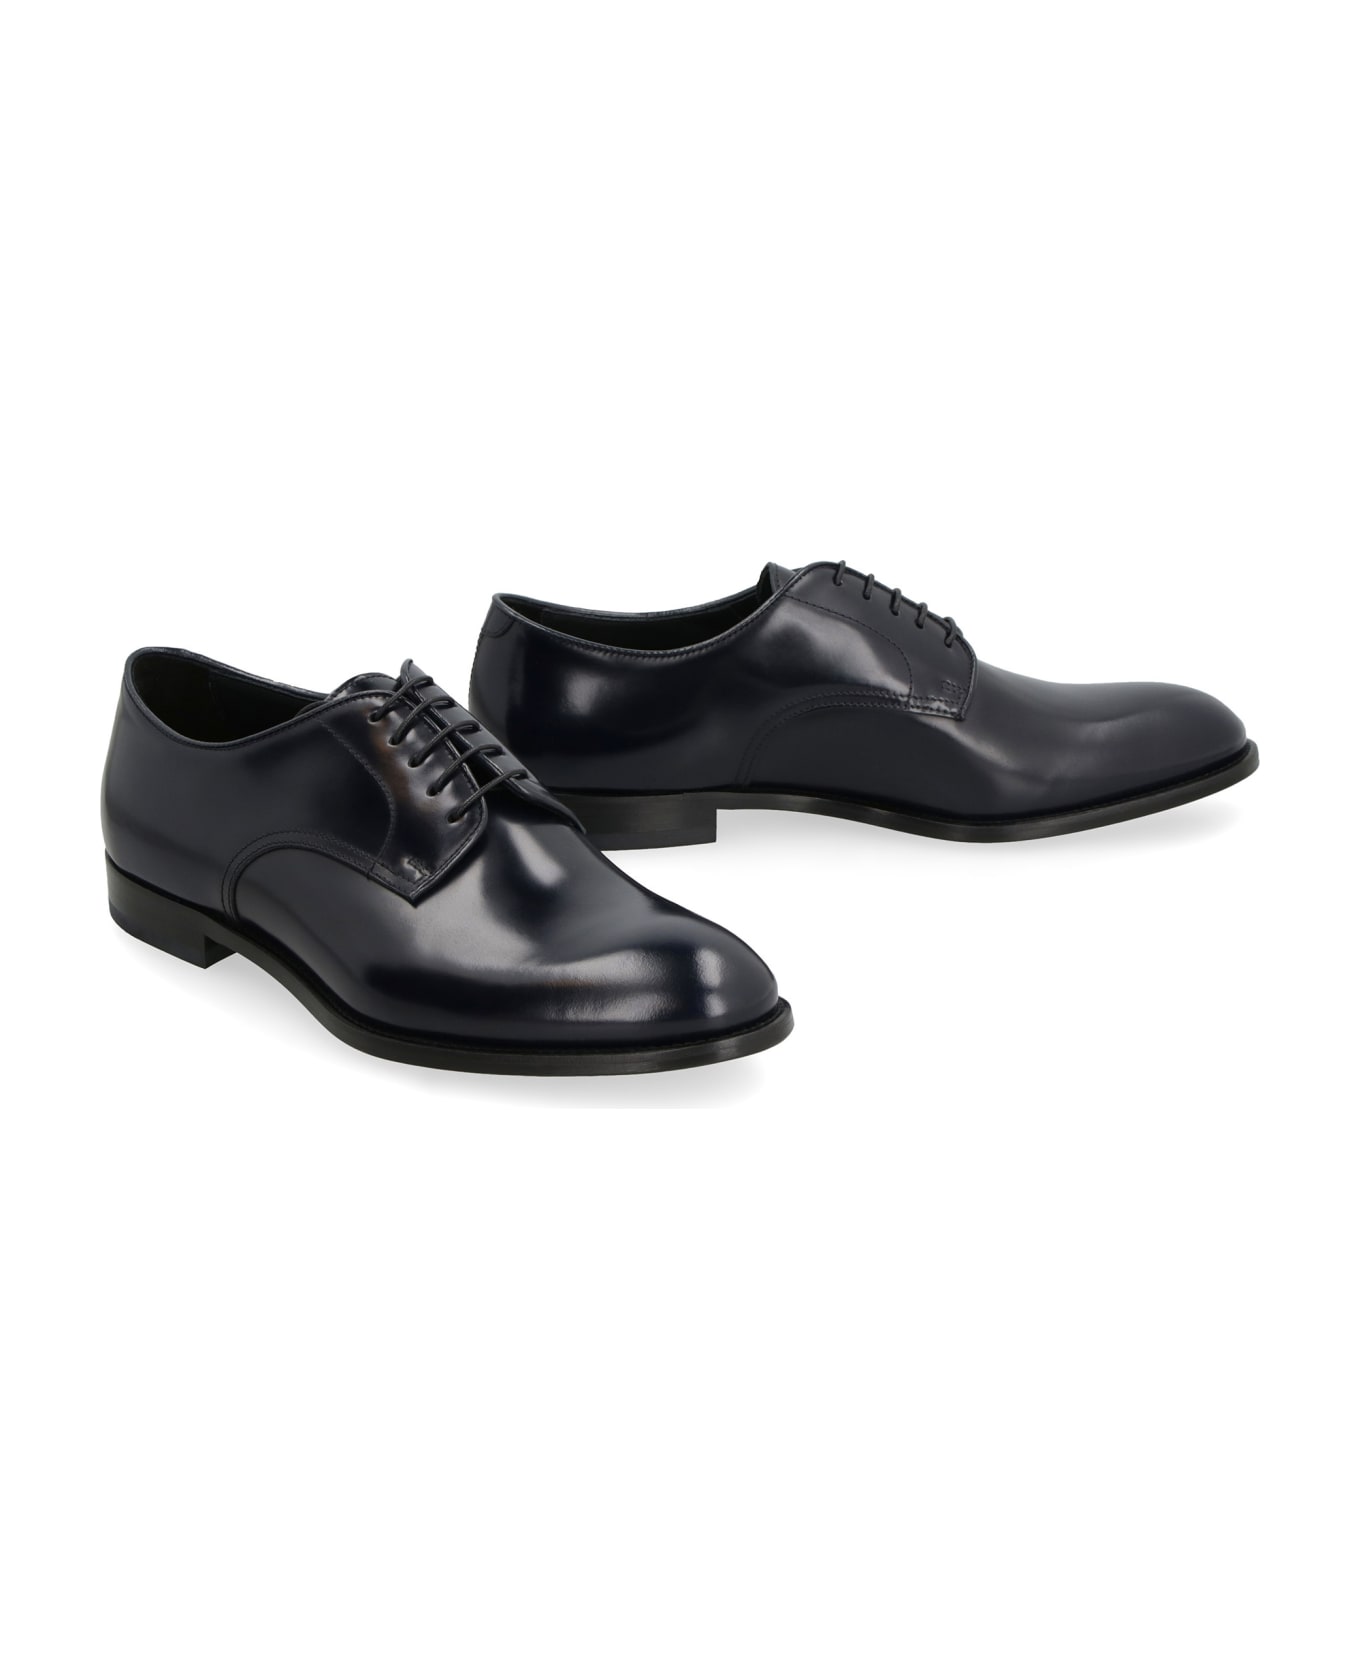 Doucal's Leather Loafers - black